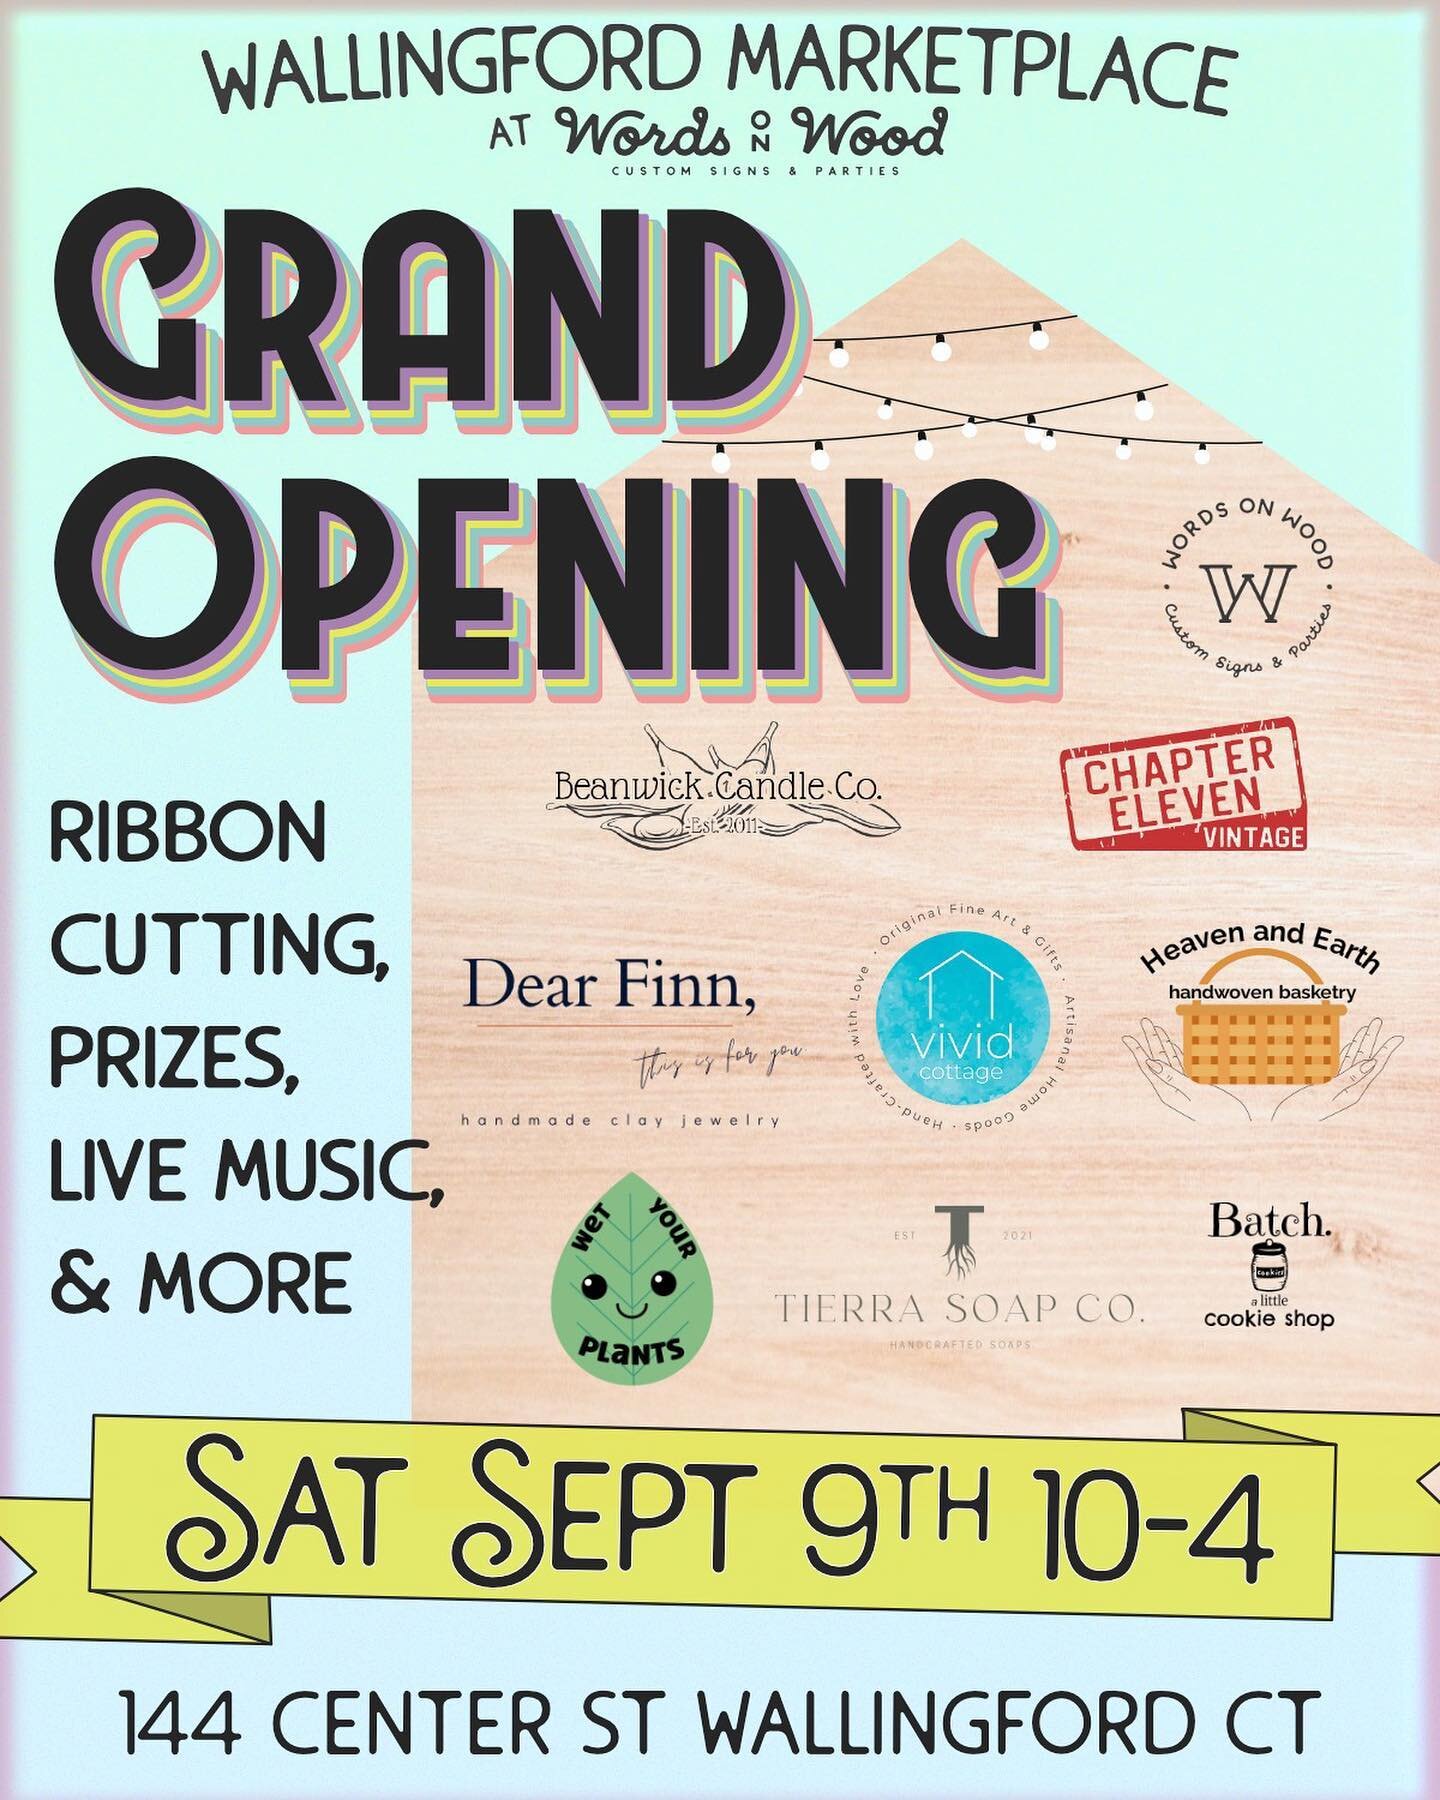 TODAY IS THE DAY!!! Stop by between 10 and 4 to celebrate the grand opening of the Wallingford Marketplace at Words on Wood! ✨🪩🎉